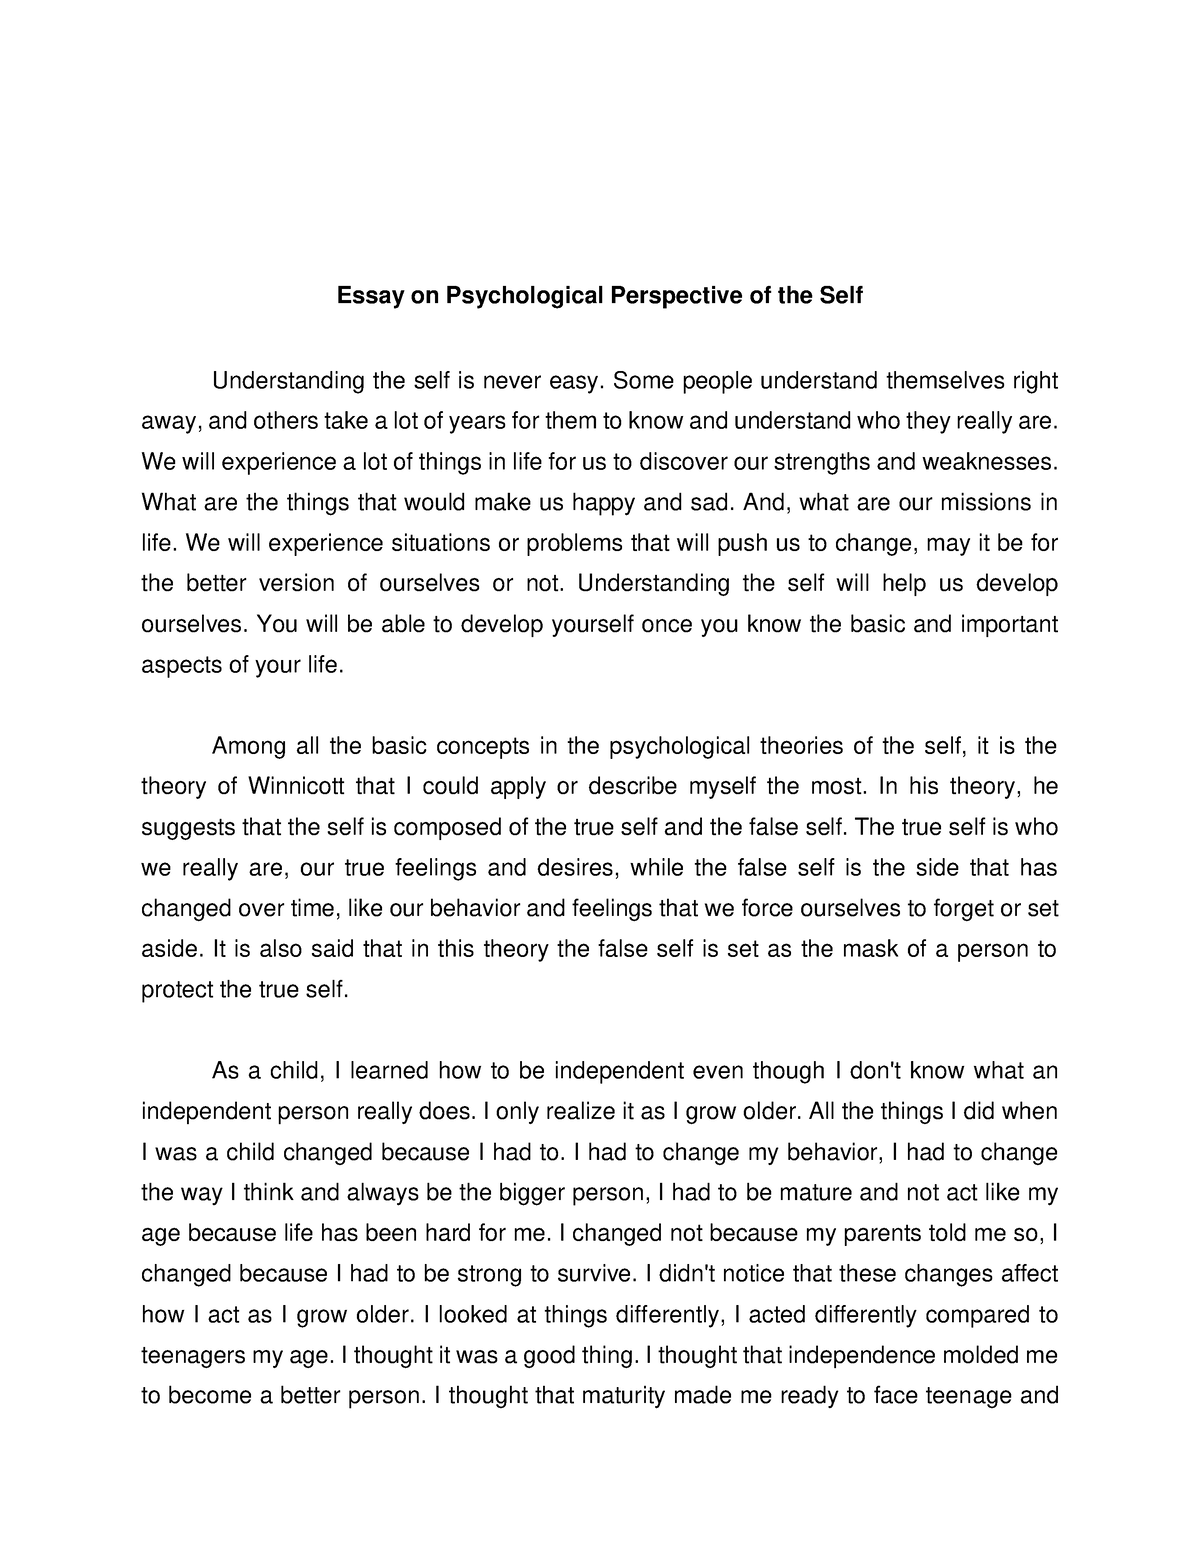 essay about perception of self